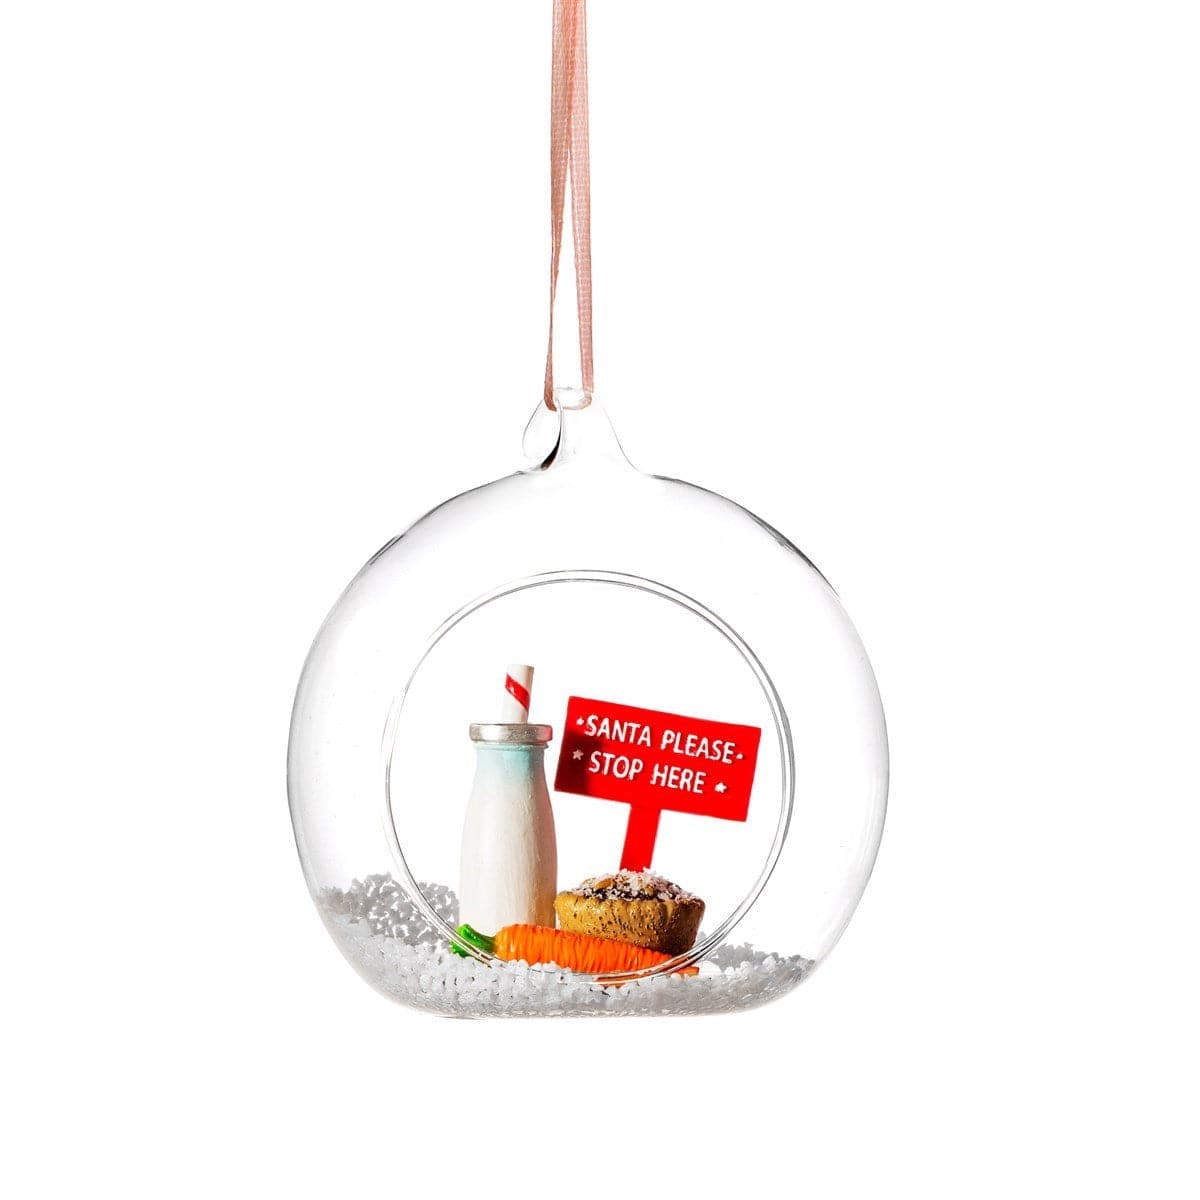 Sass & Belle Christmas Christmas Decorations Santa Please Stop Here Christmas Tree Bauble